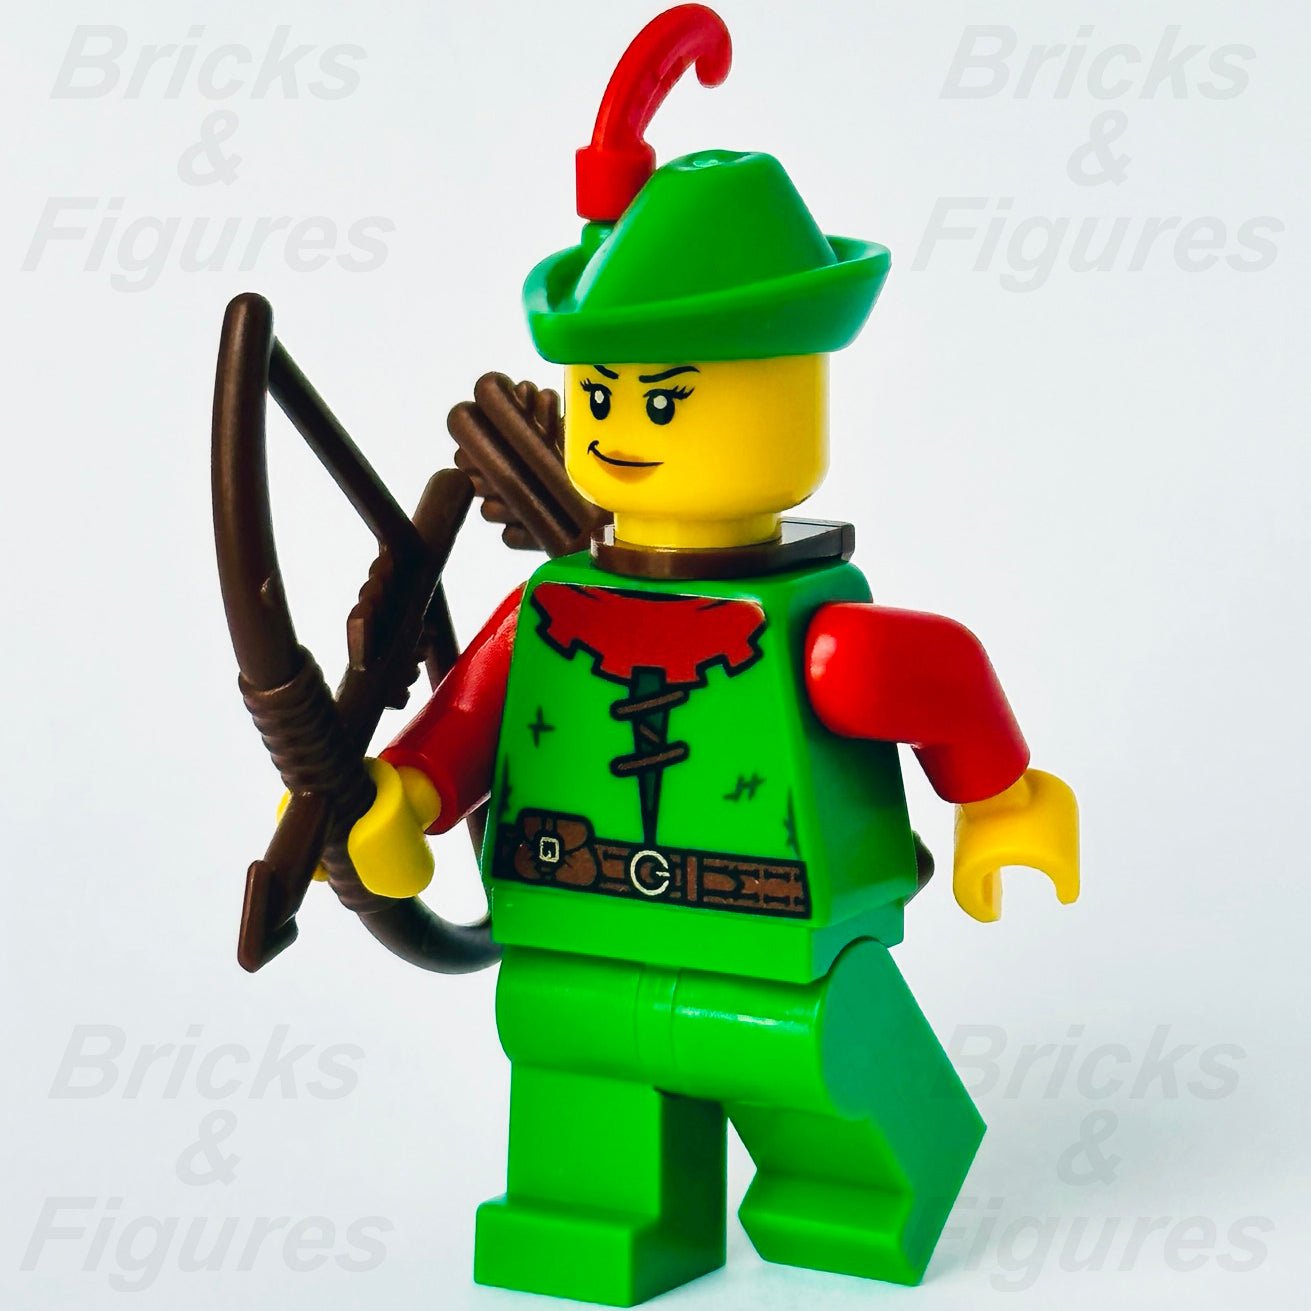 LEGO Forestwoman Castle Forestmen Minifigure with Bow Lion Knights 10305 cas572 - Bricks & Figures